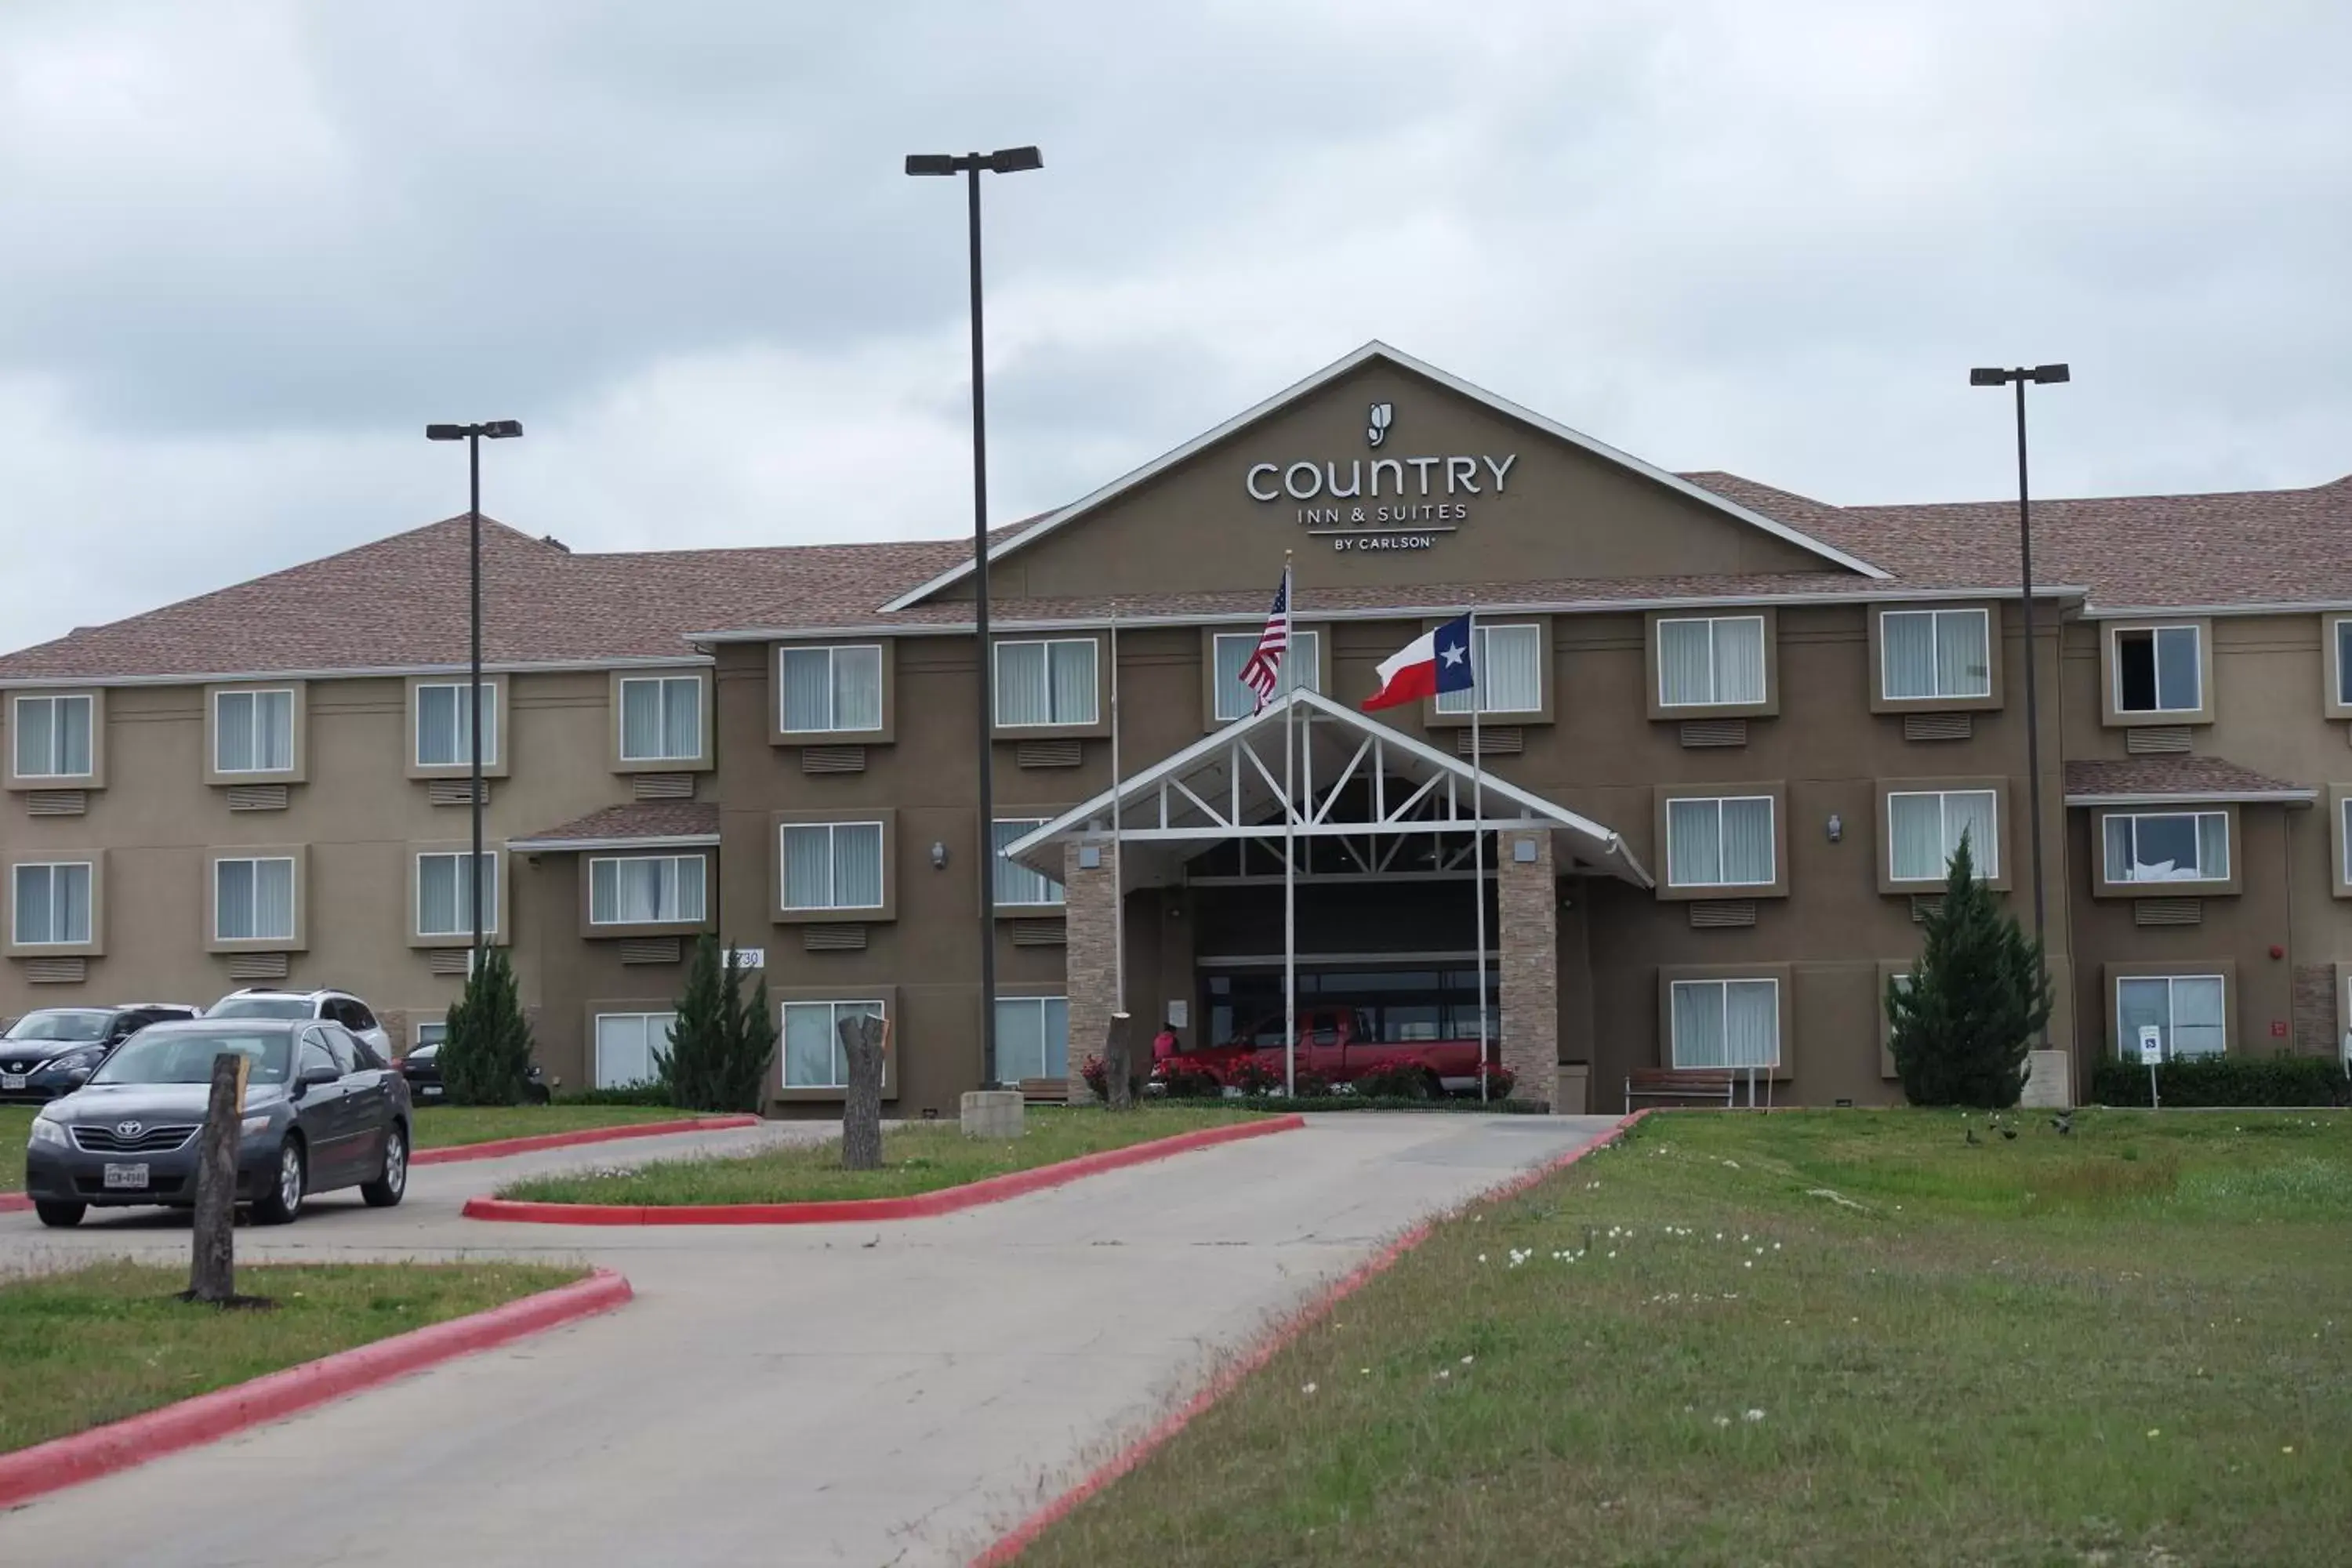 Facade/entrance, Property Building in Country Inn & Suites by Radisson, Fort Worth West l-30 NAS JRB